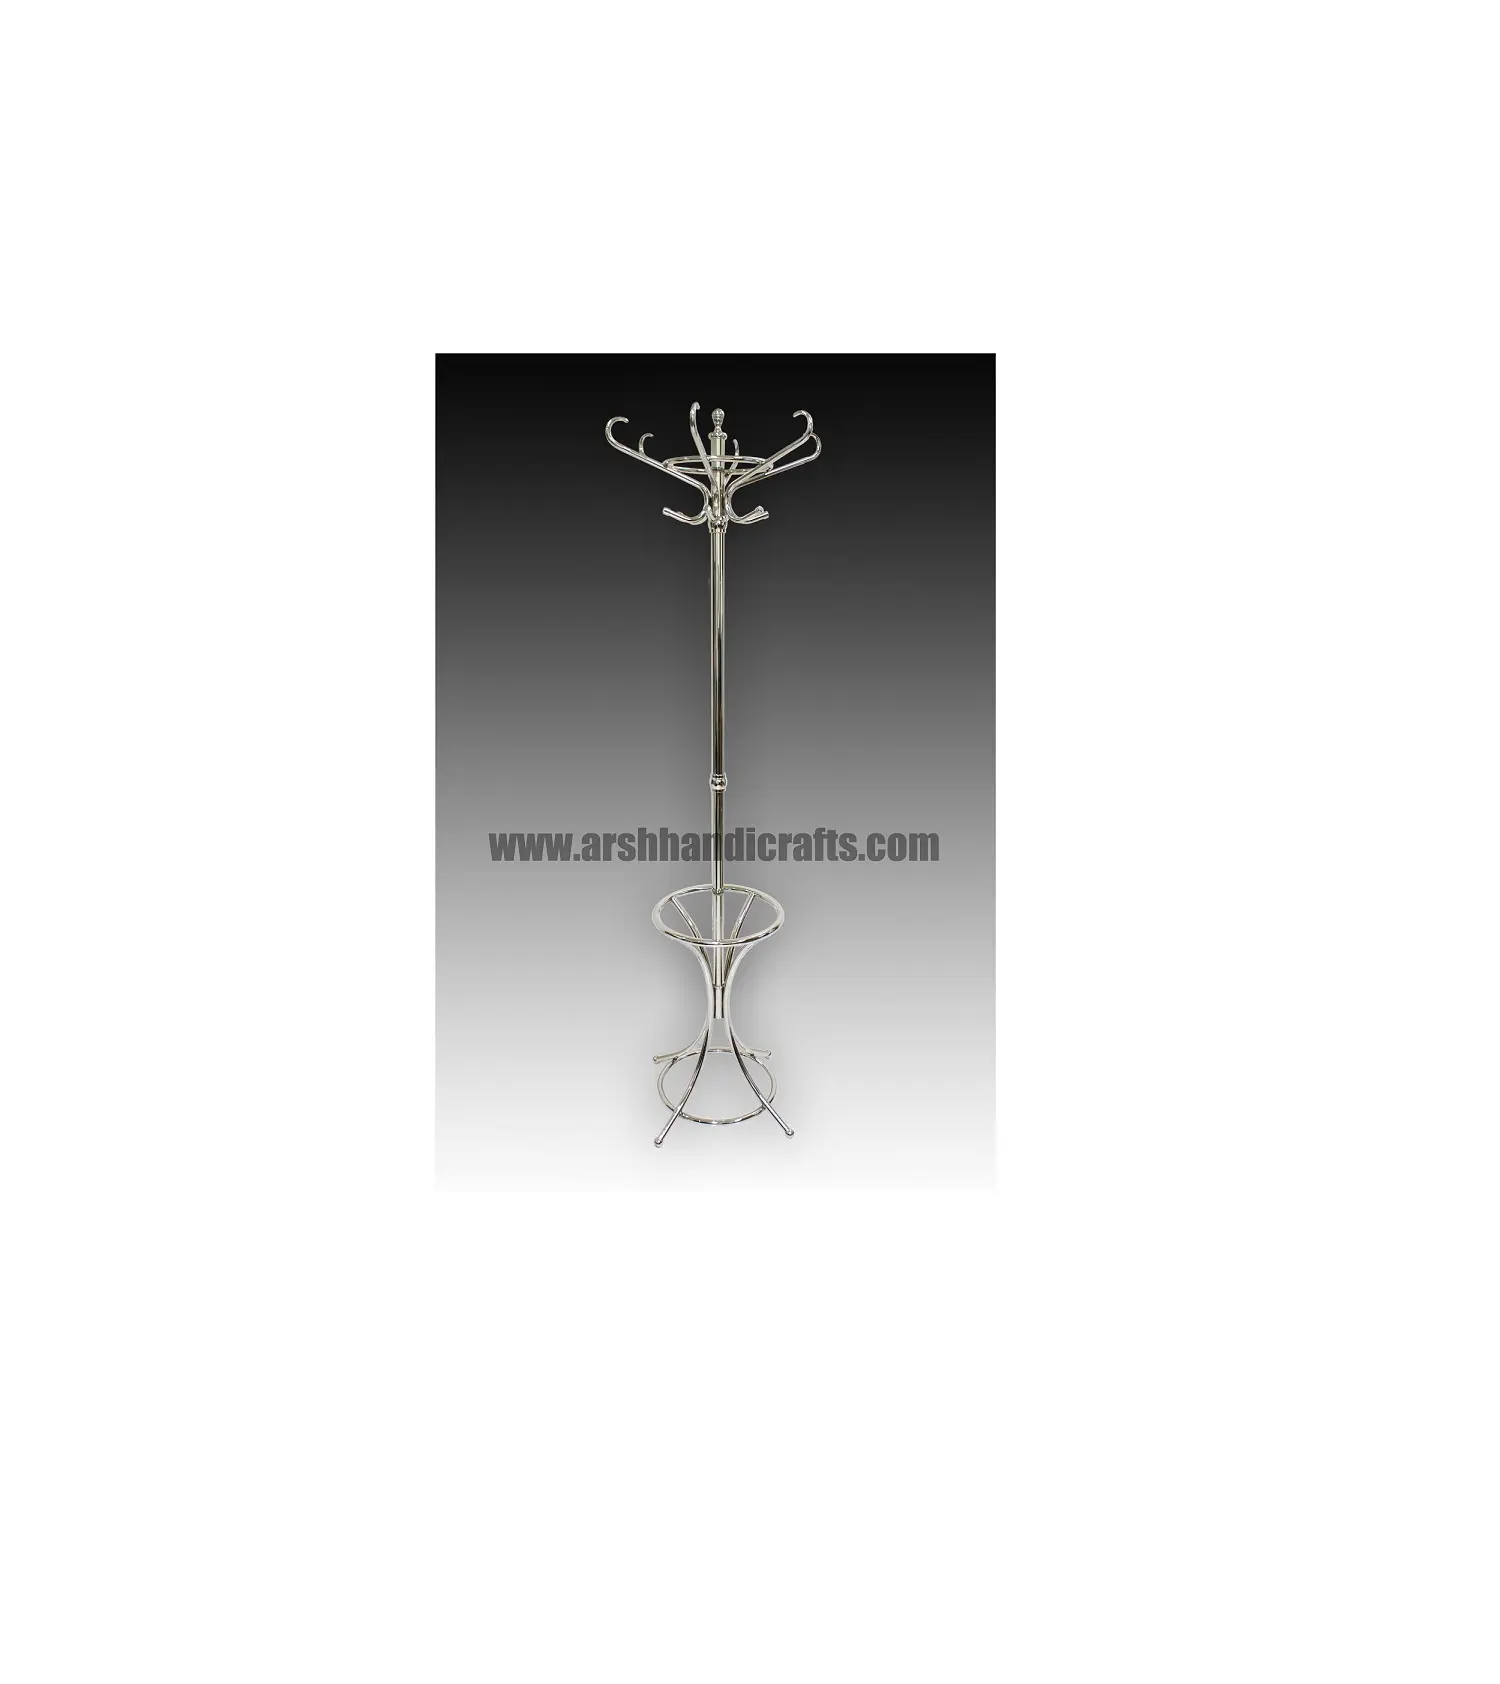 Luxury Brass Coat/Clothes/Scarf Hanger for Housewares home storage and organization customize size in high quality finishing